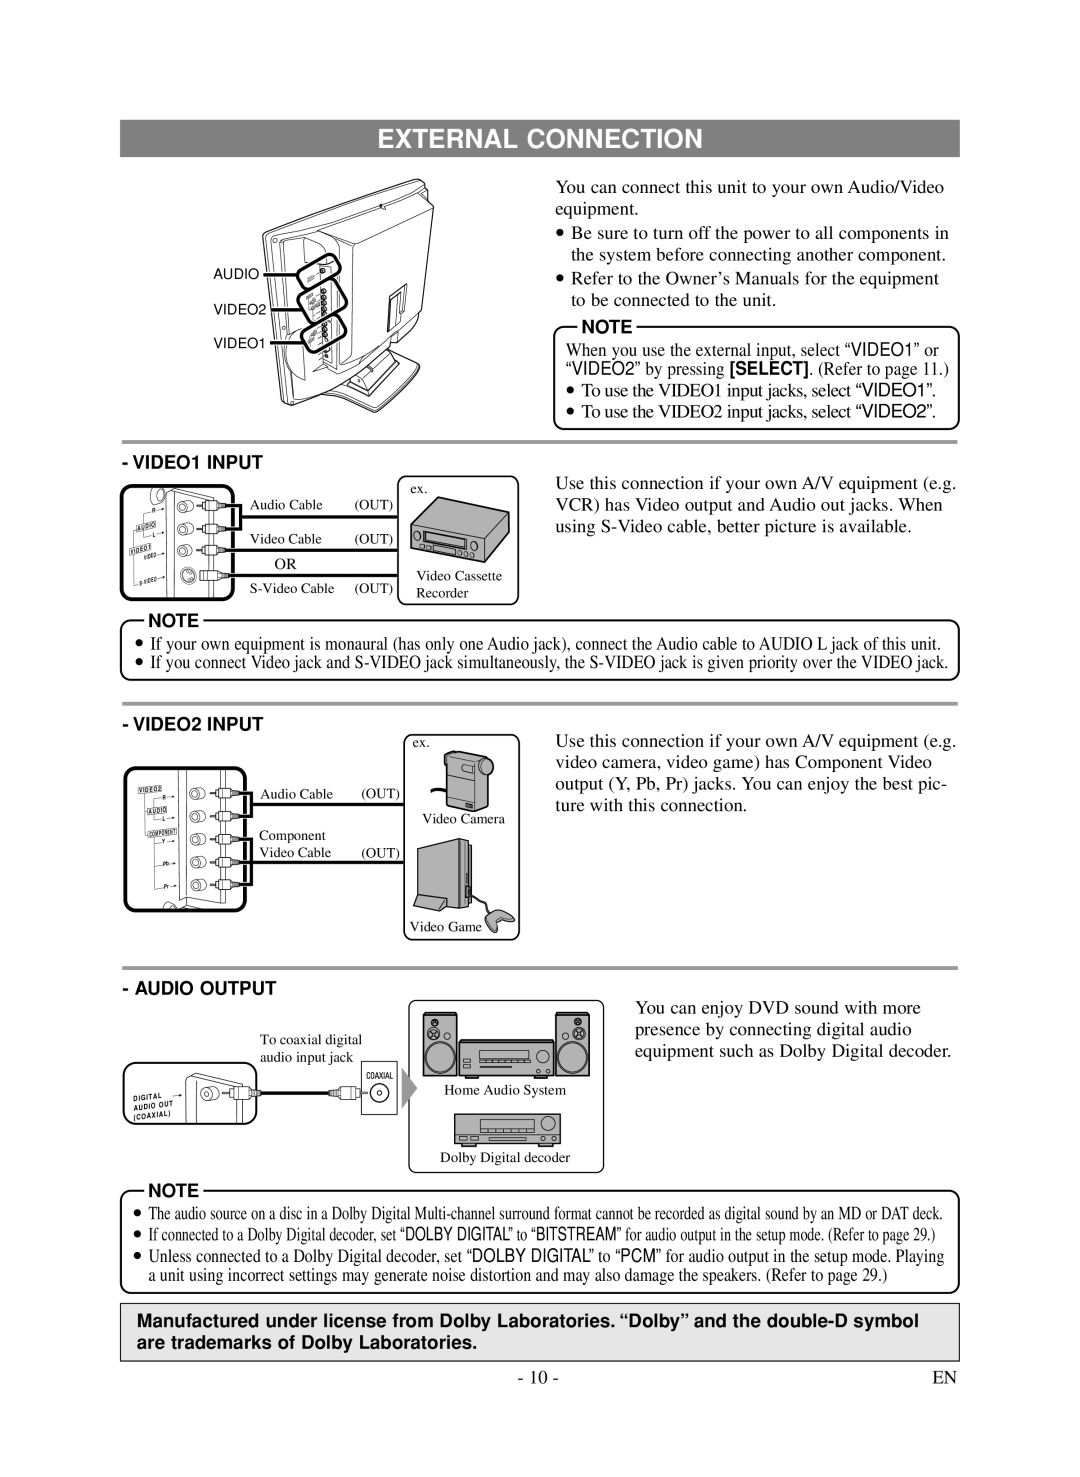 Symphonic LCD TV/DVD owner manual External Connection, VIDEO1 INPUT, VIDEO2 INPUT, Audio Output 